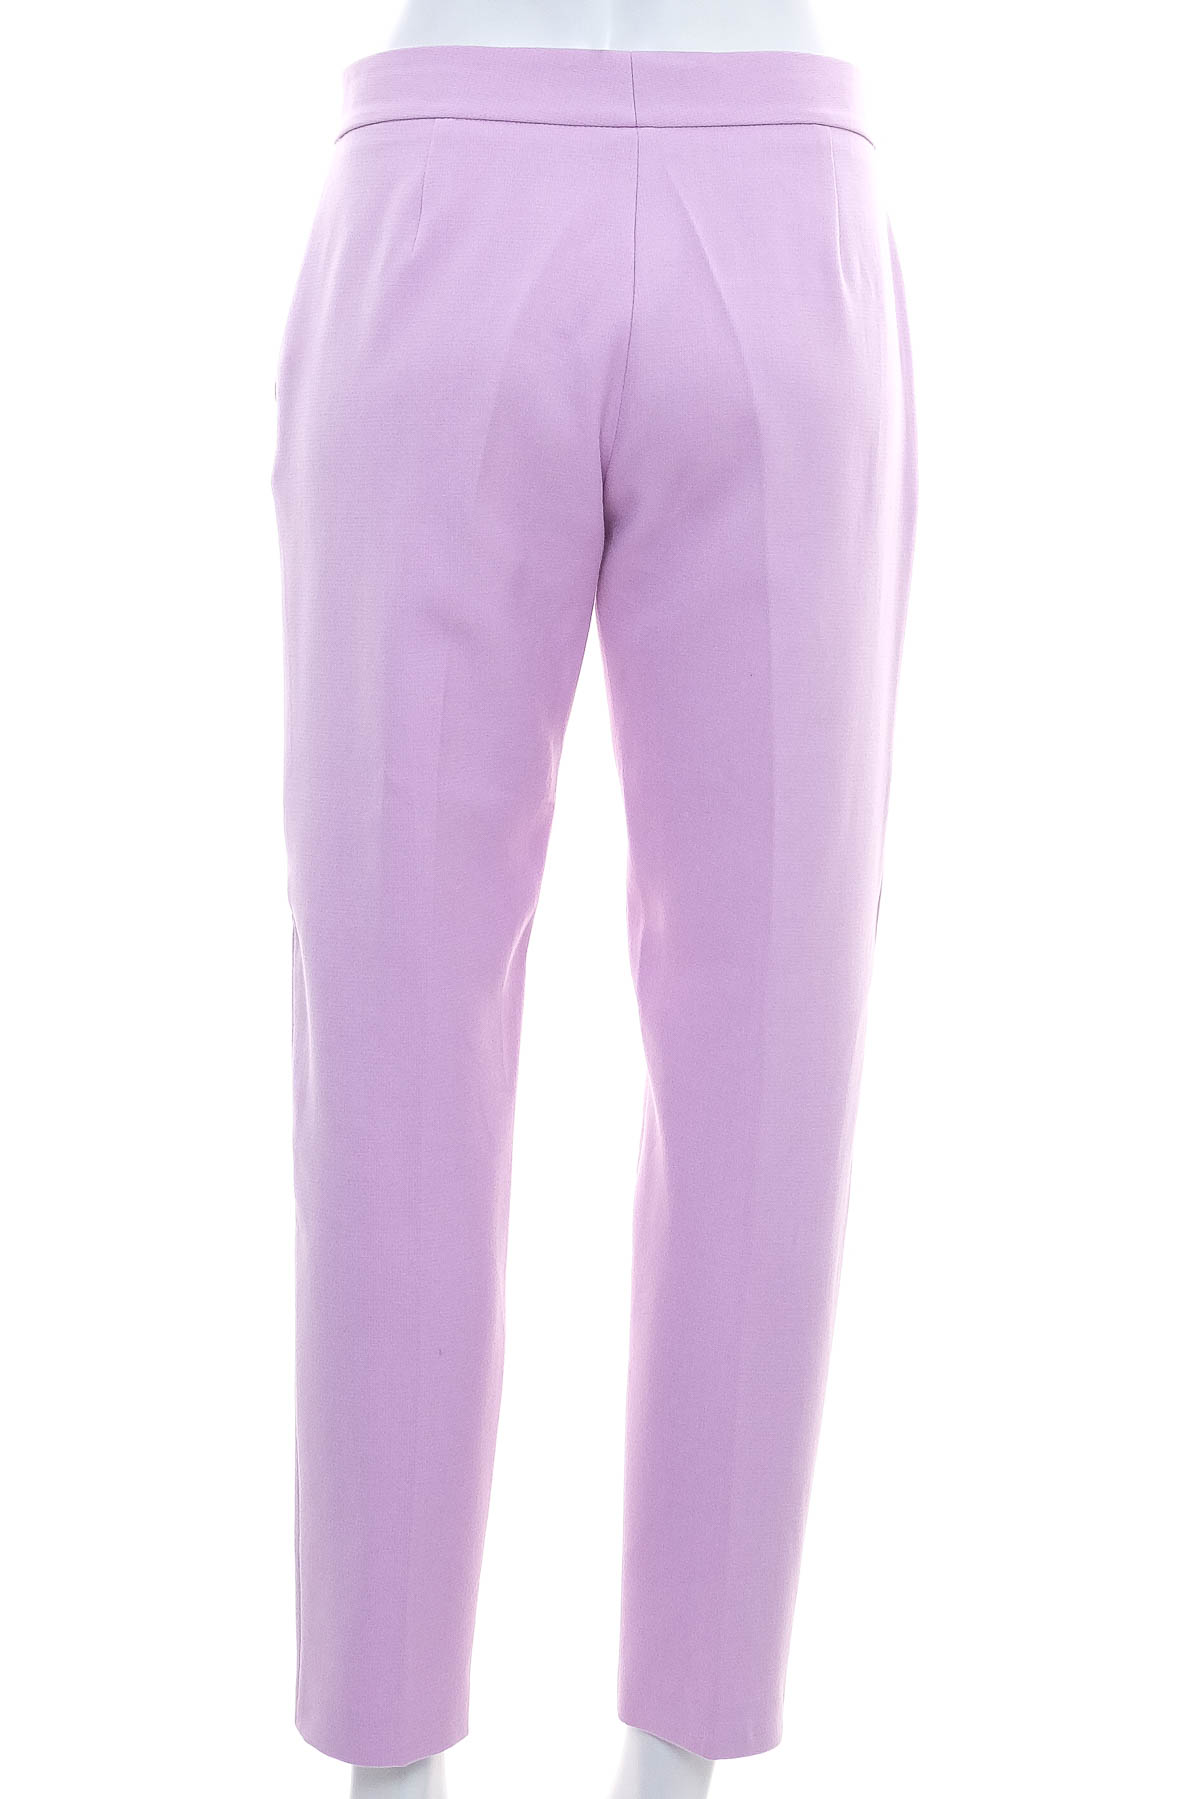 Women's trousers - French Connection - 1